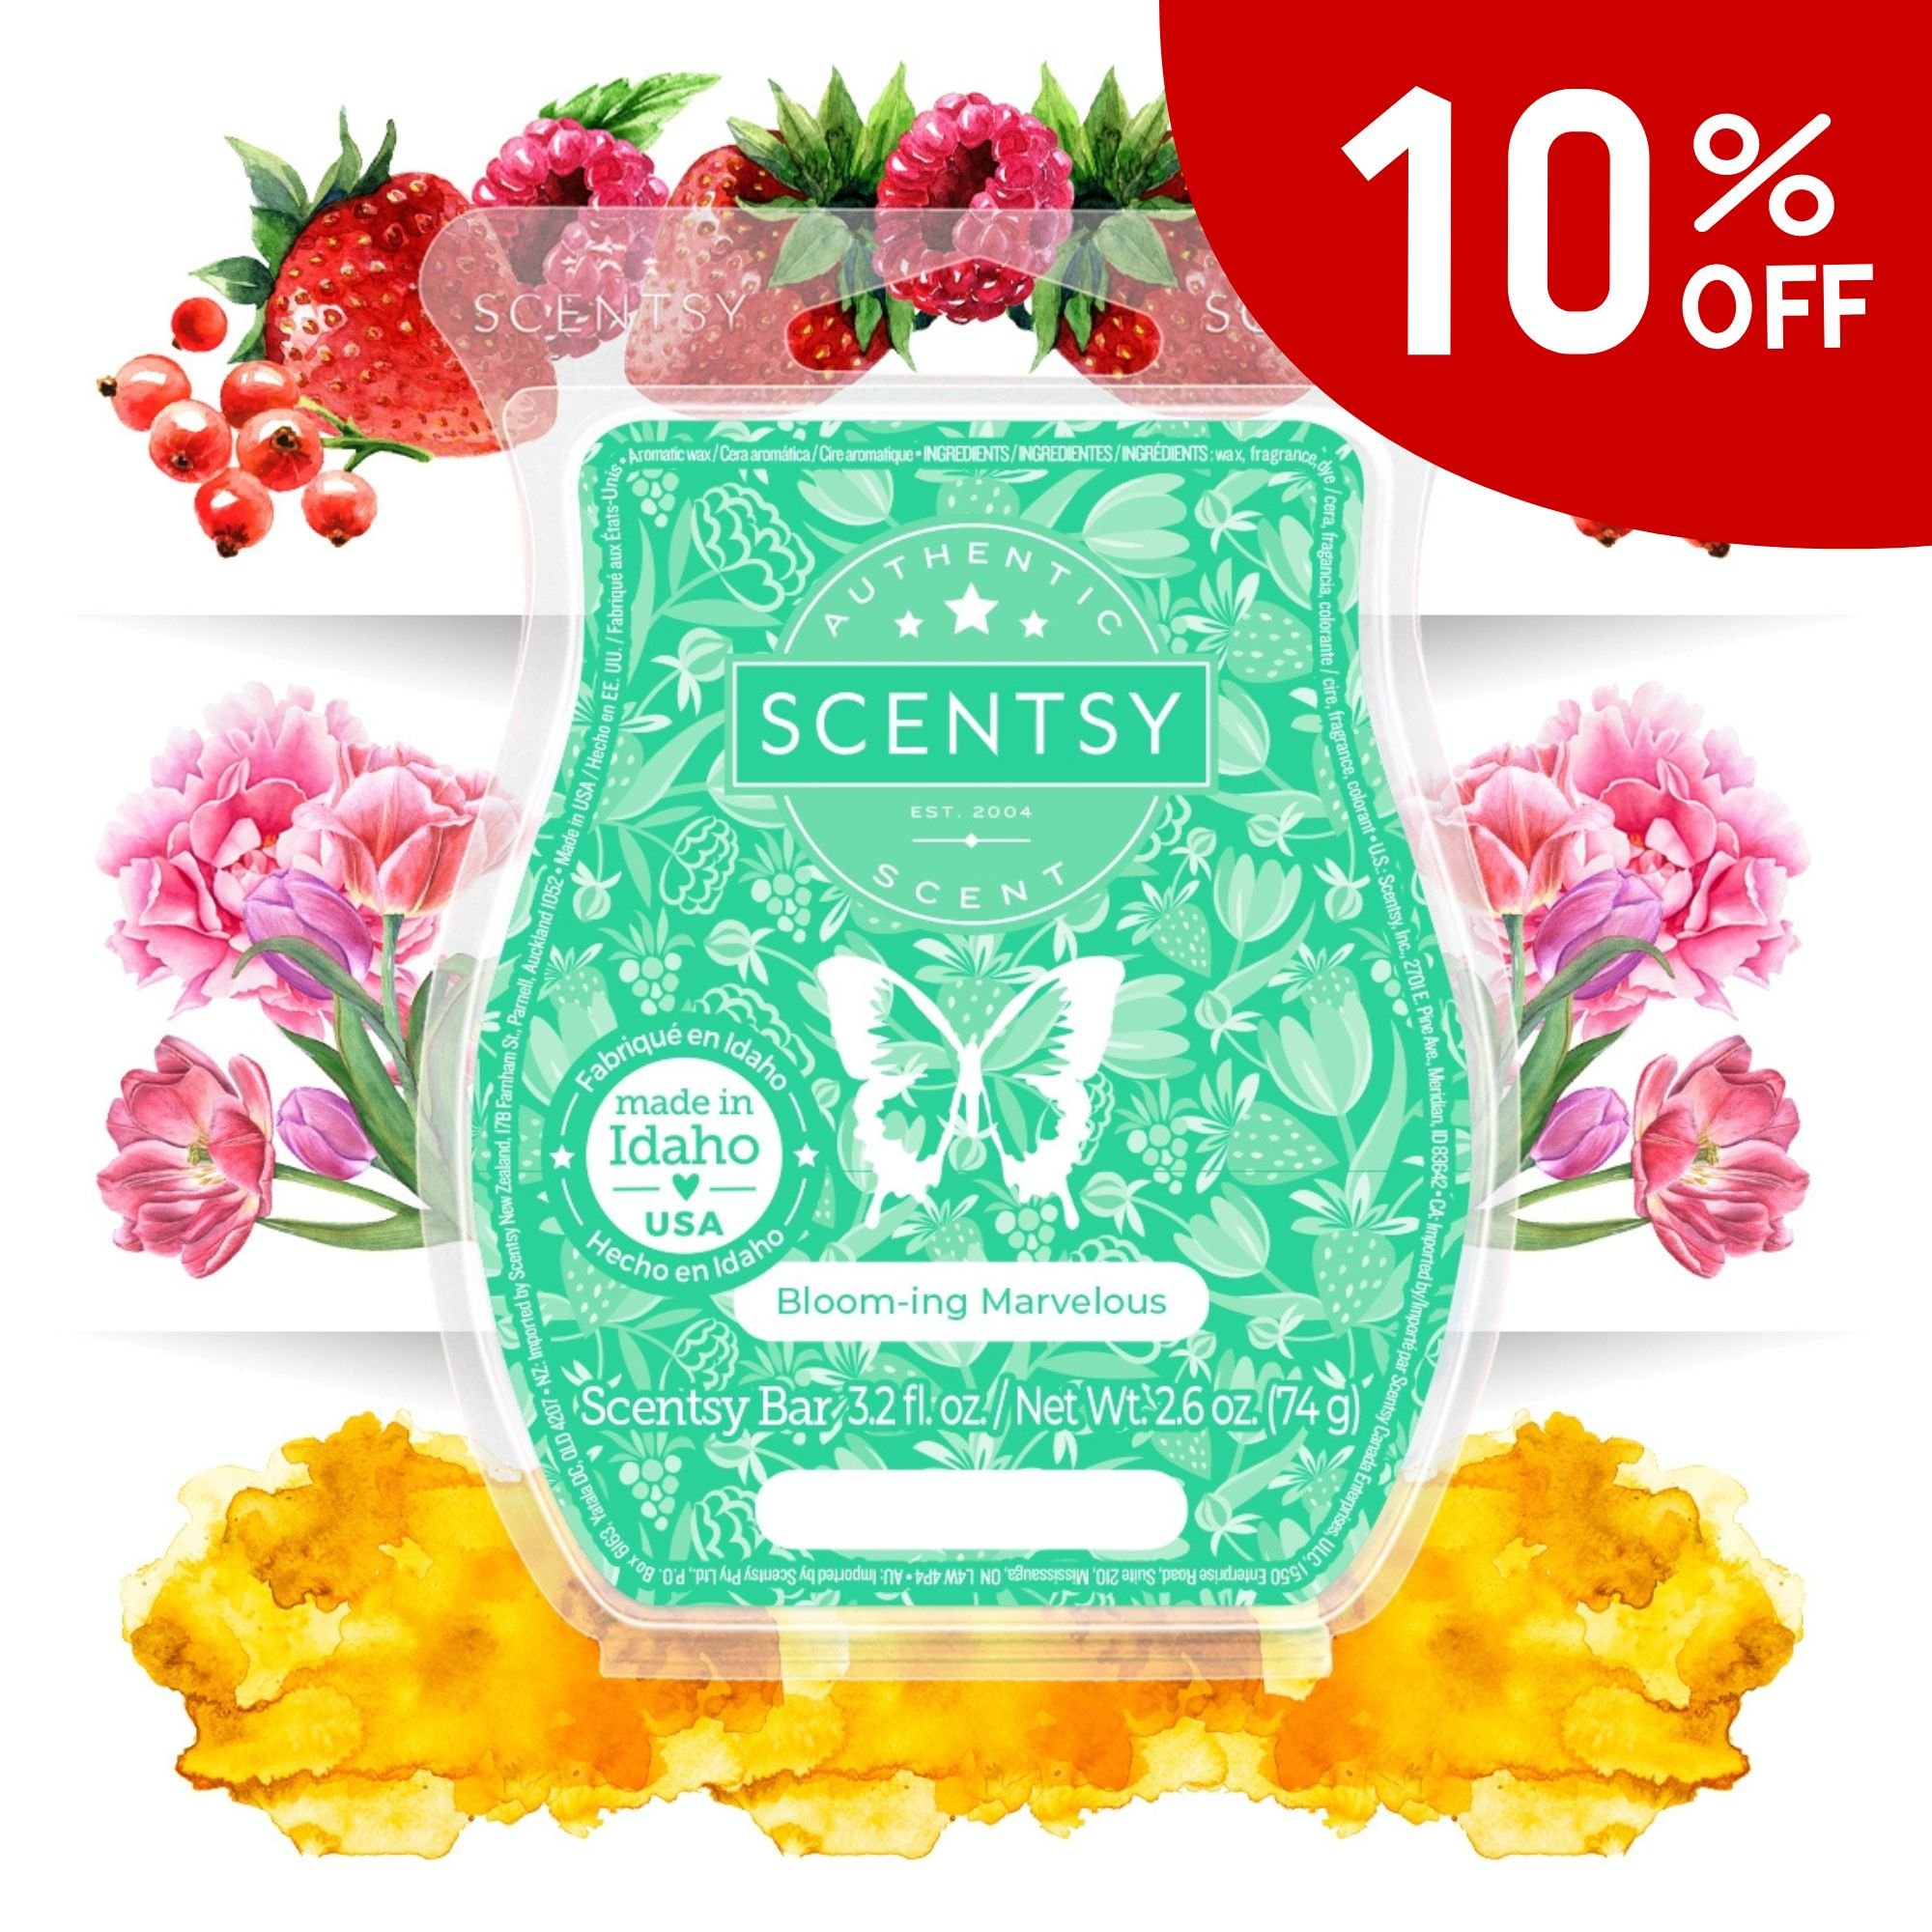 Copy of 10% off May scent of the month.jpg